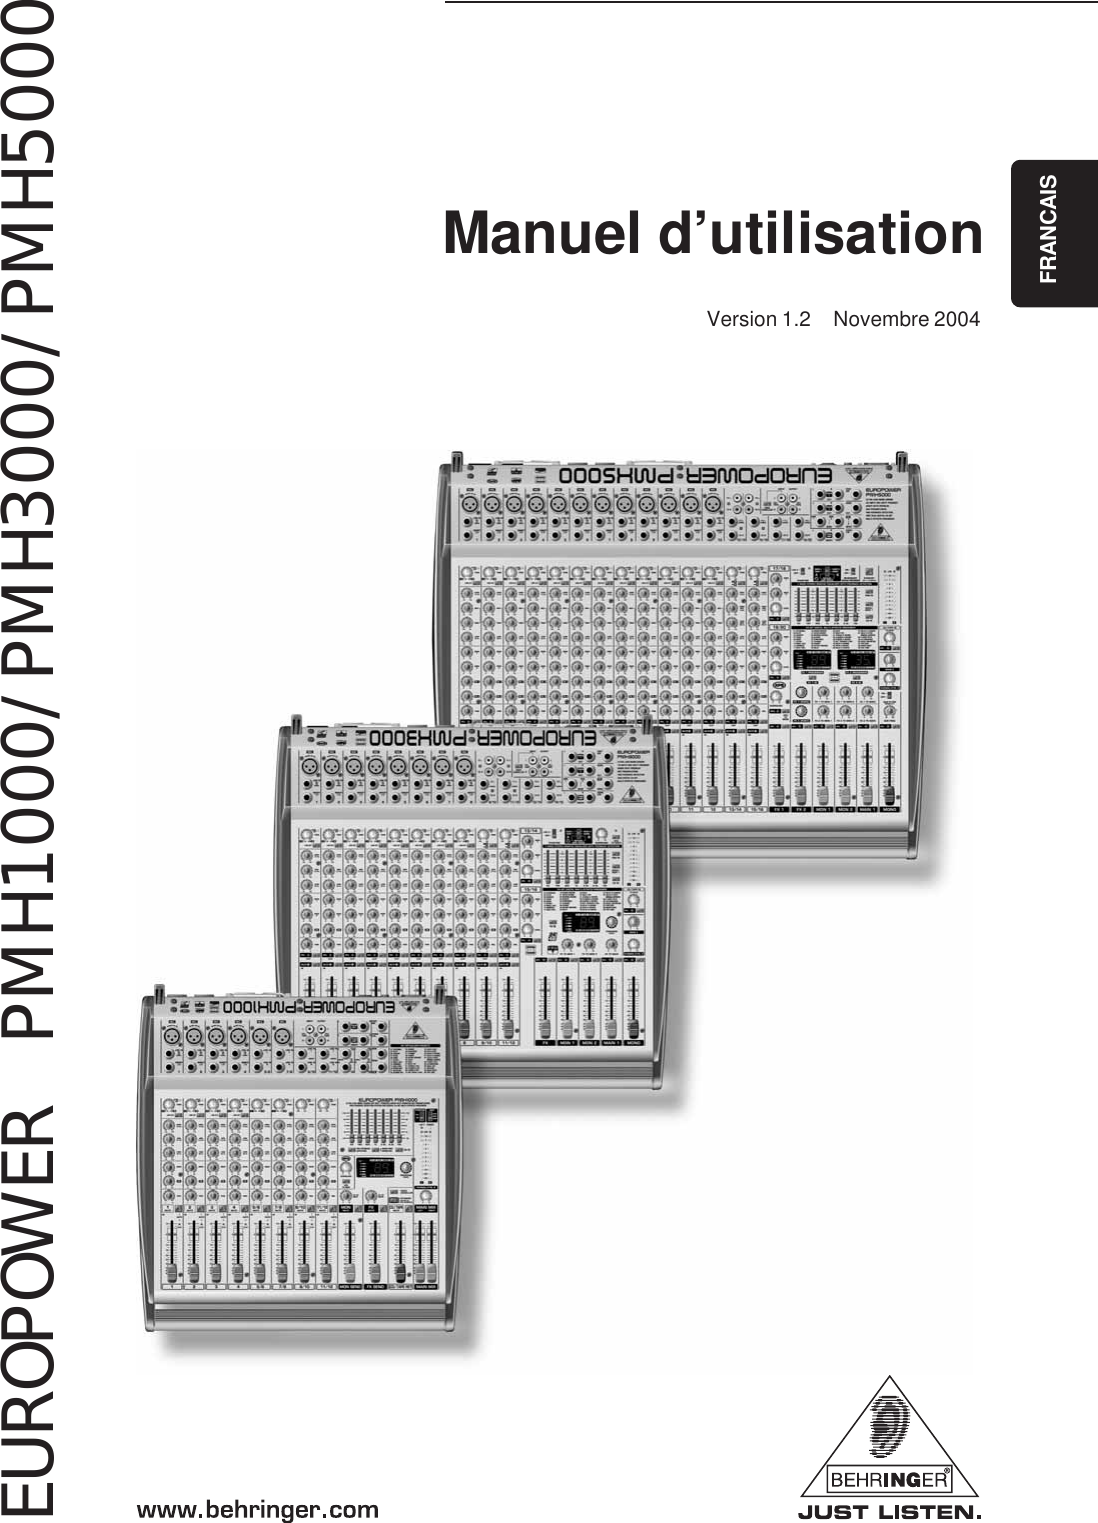 Page 1 of 12 - Behringer PMH1000 User Manual (French) P0115 M FR